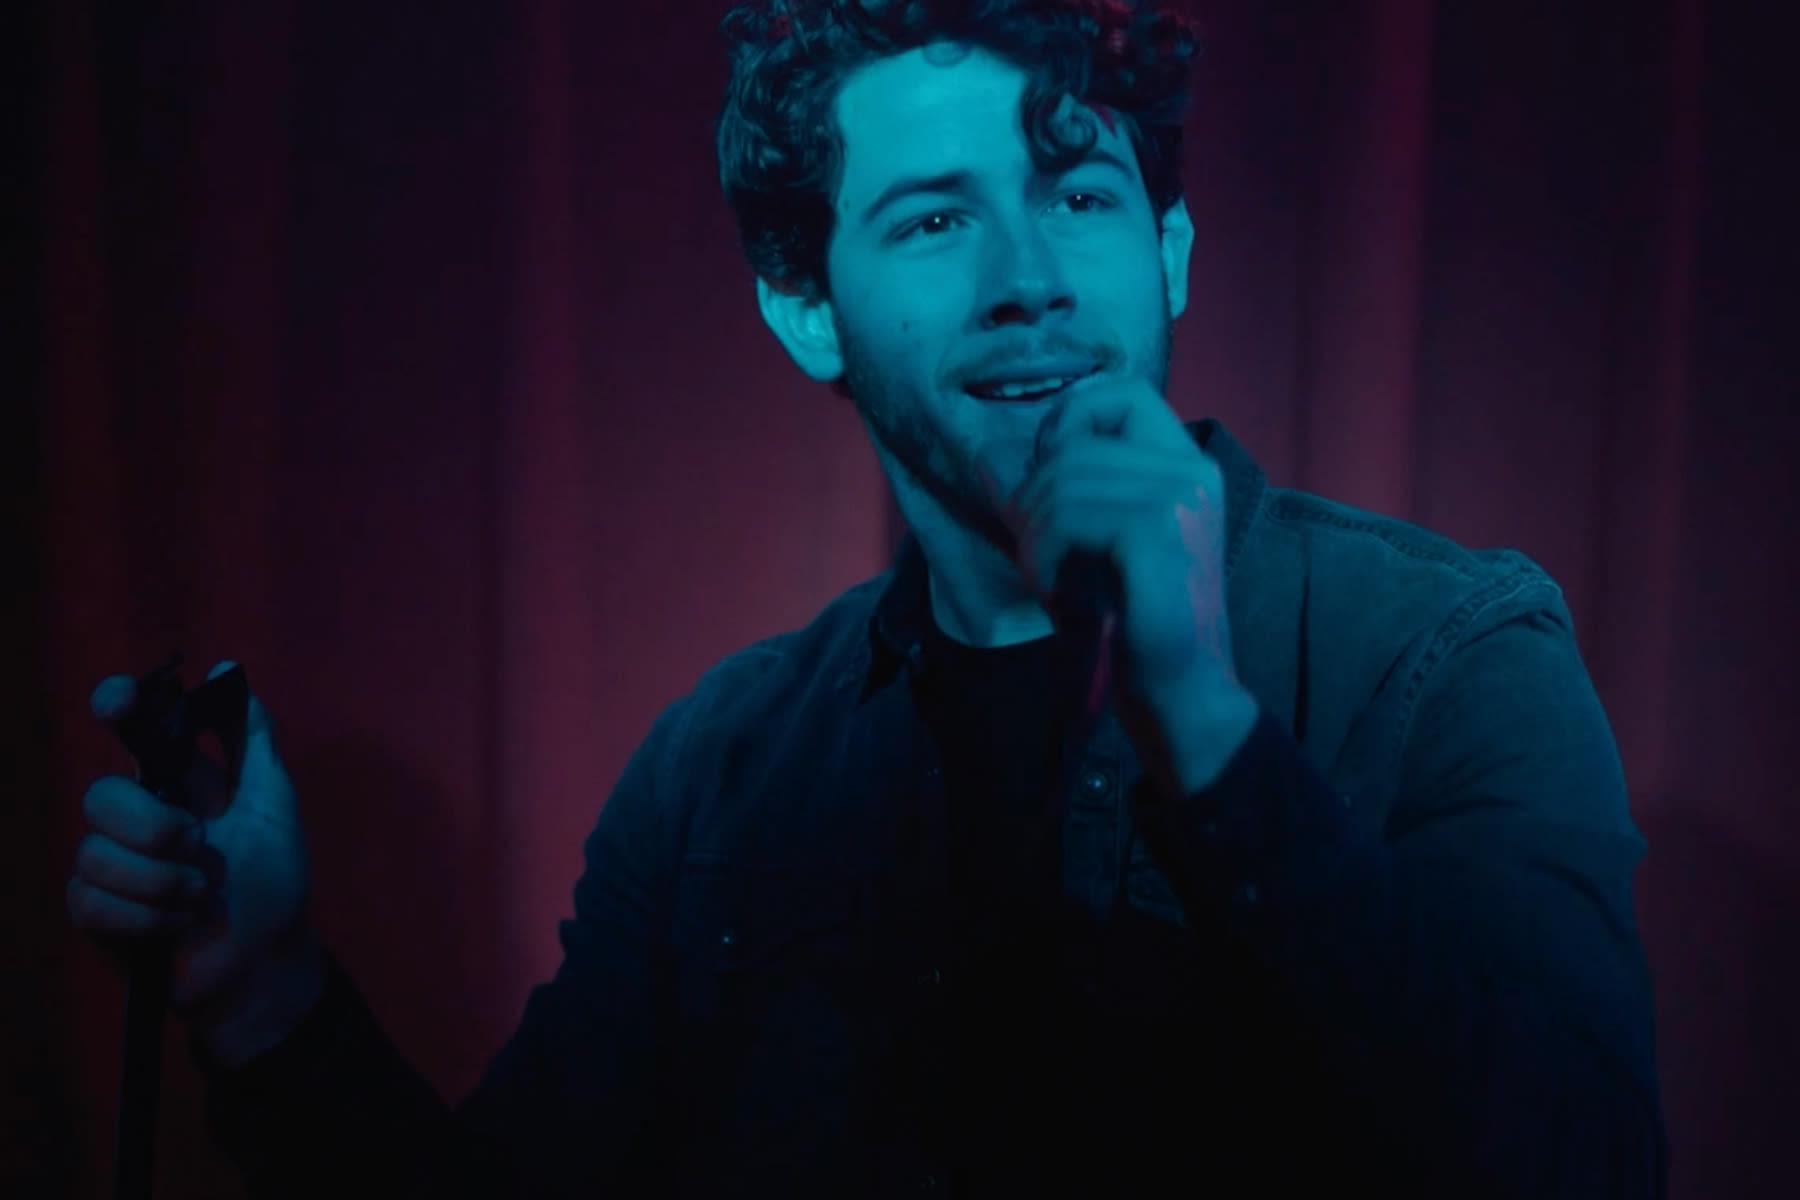 Nick Jonas Sings ‘I Melt With You’ at a Karaoke Bar in ‘The Good Half’